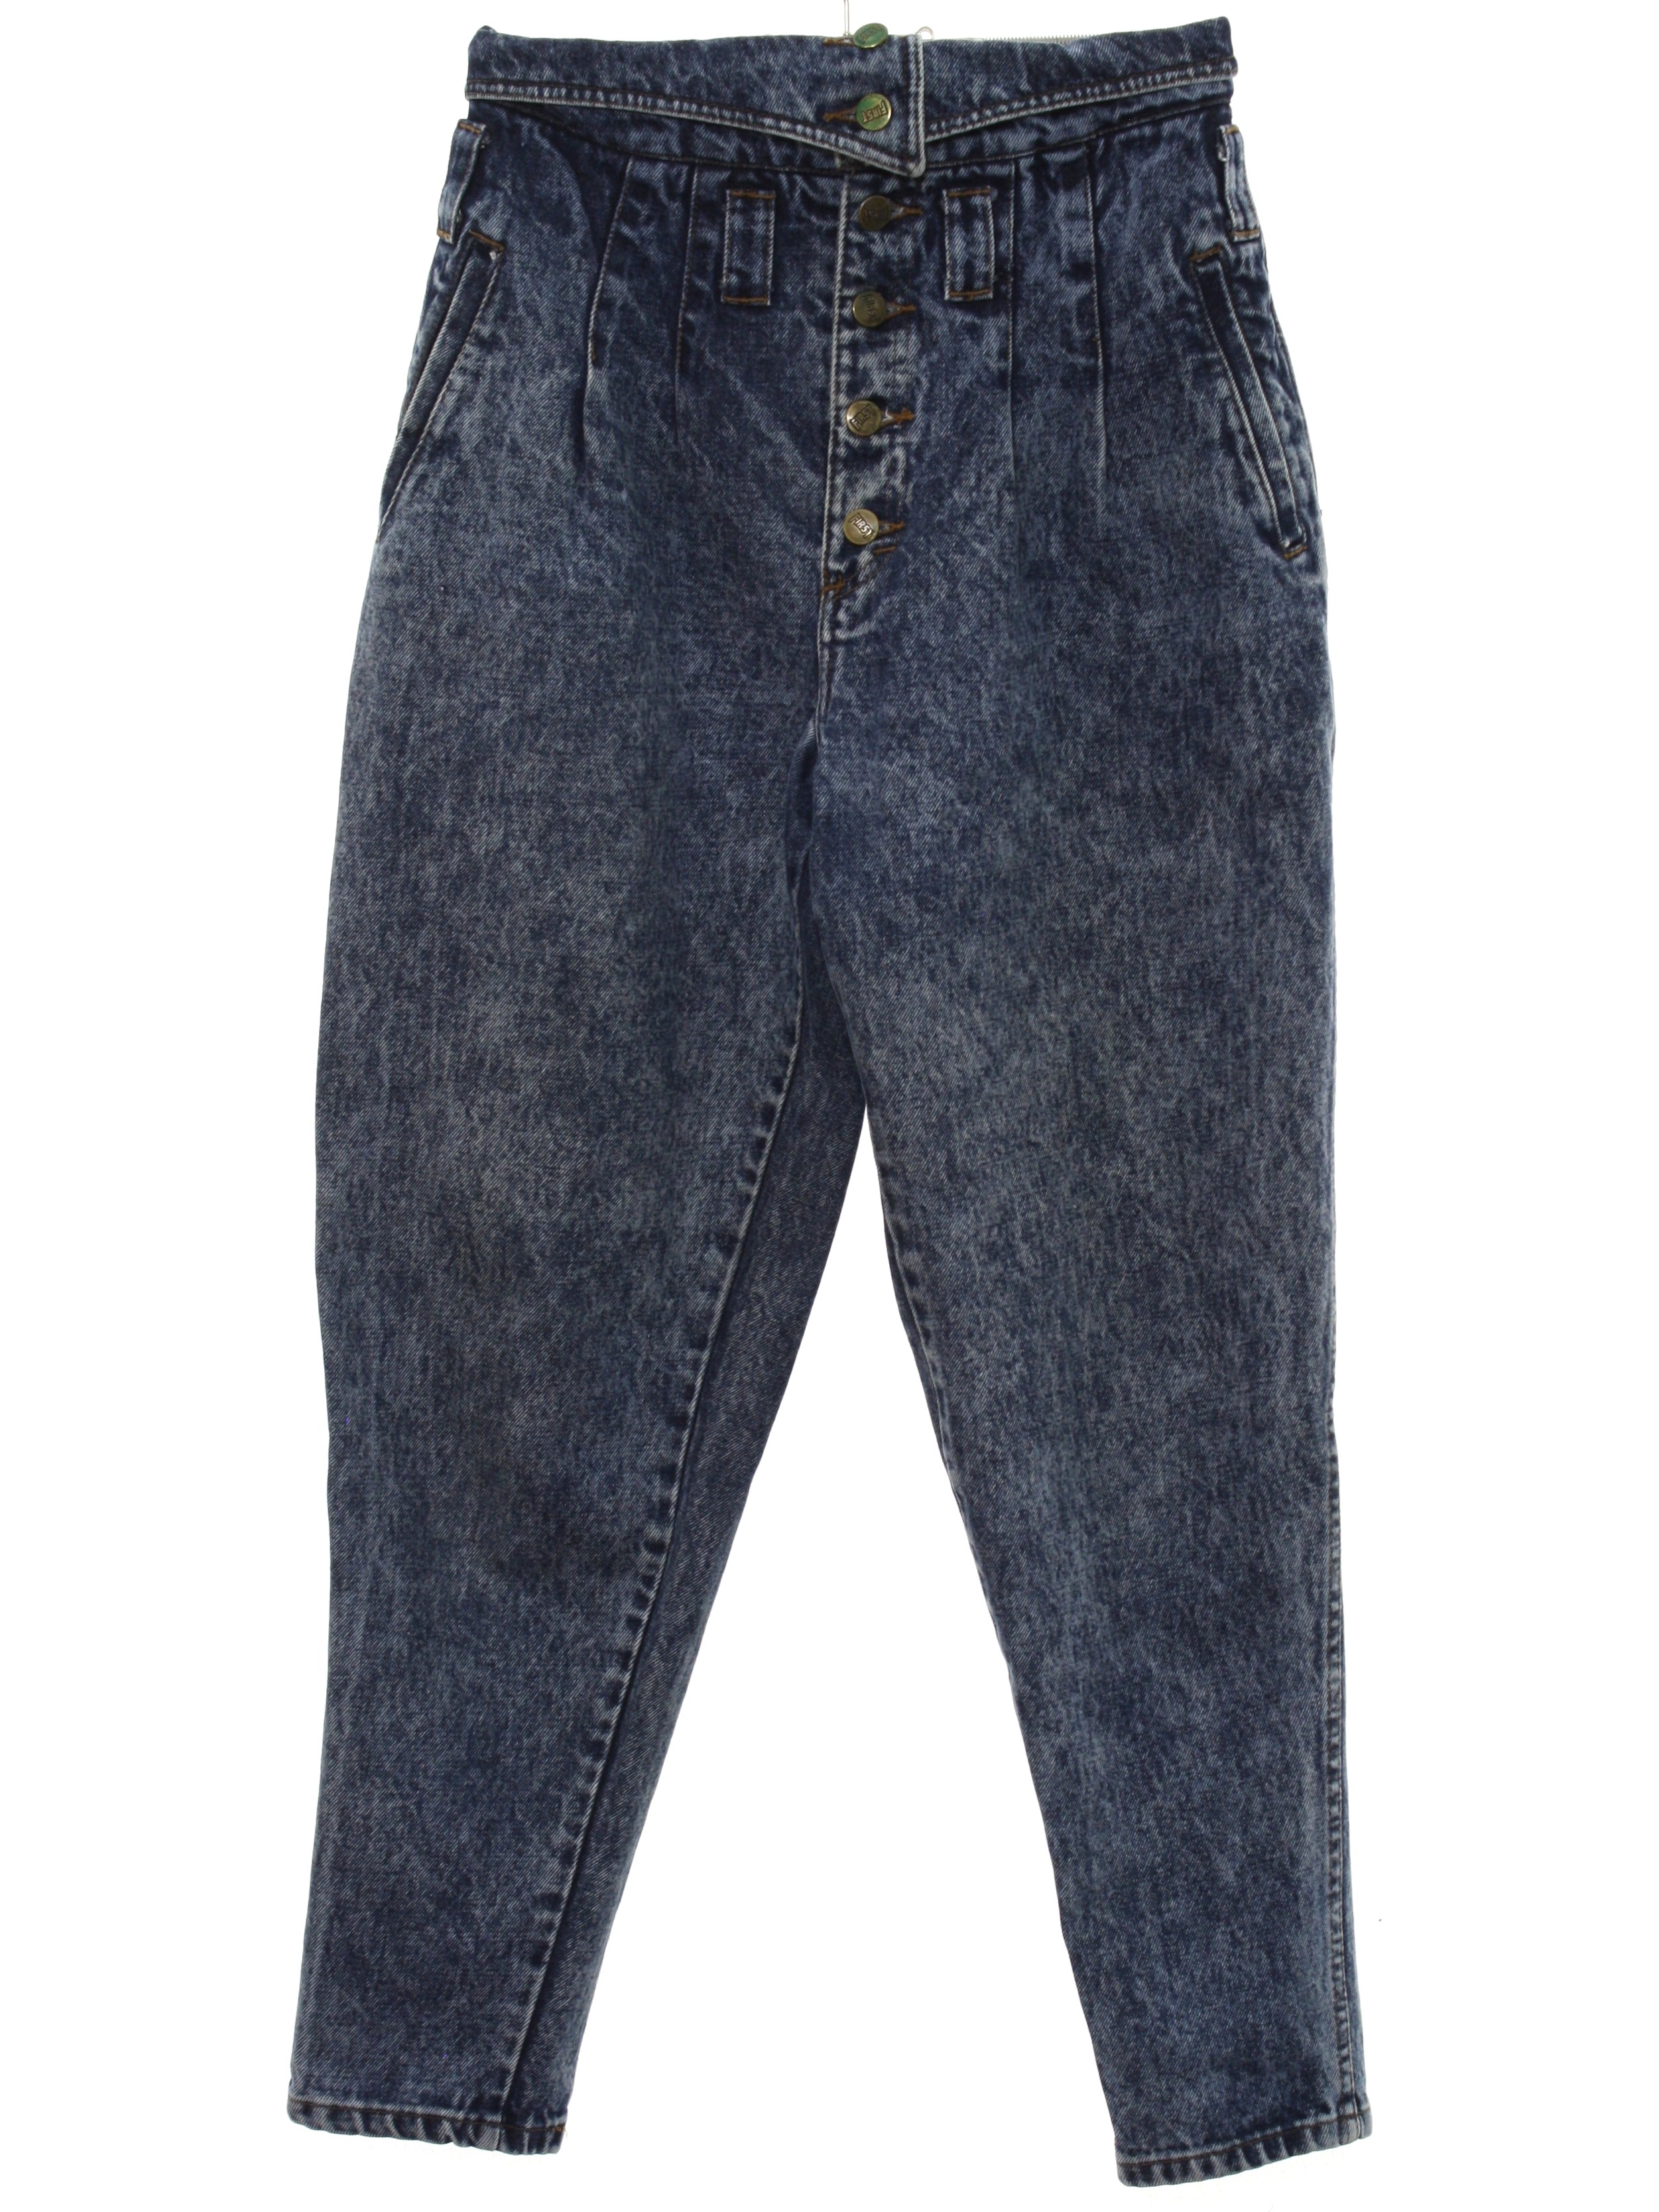 Pants: Late 80s or early 90s First- Womens acid washed dark blue cotton ...